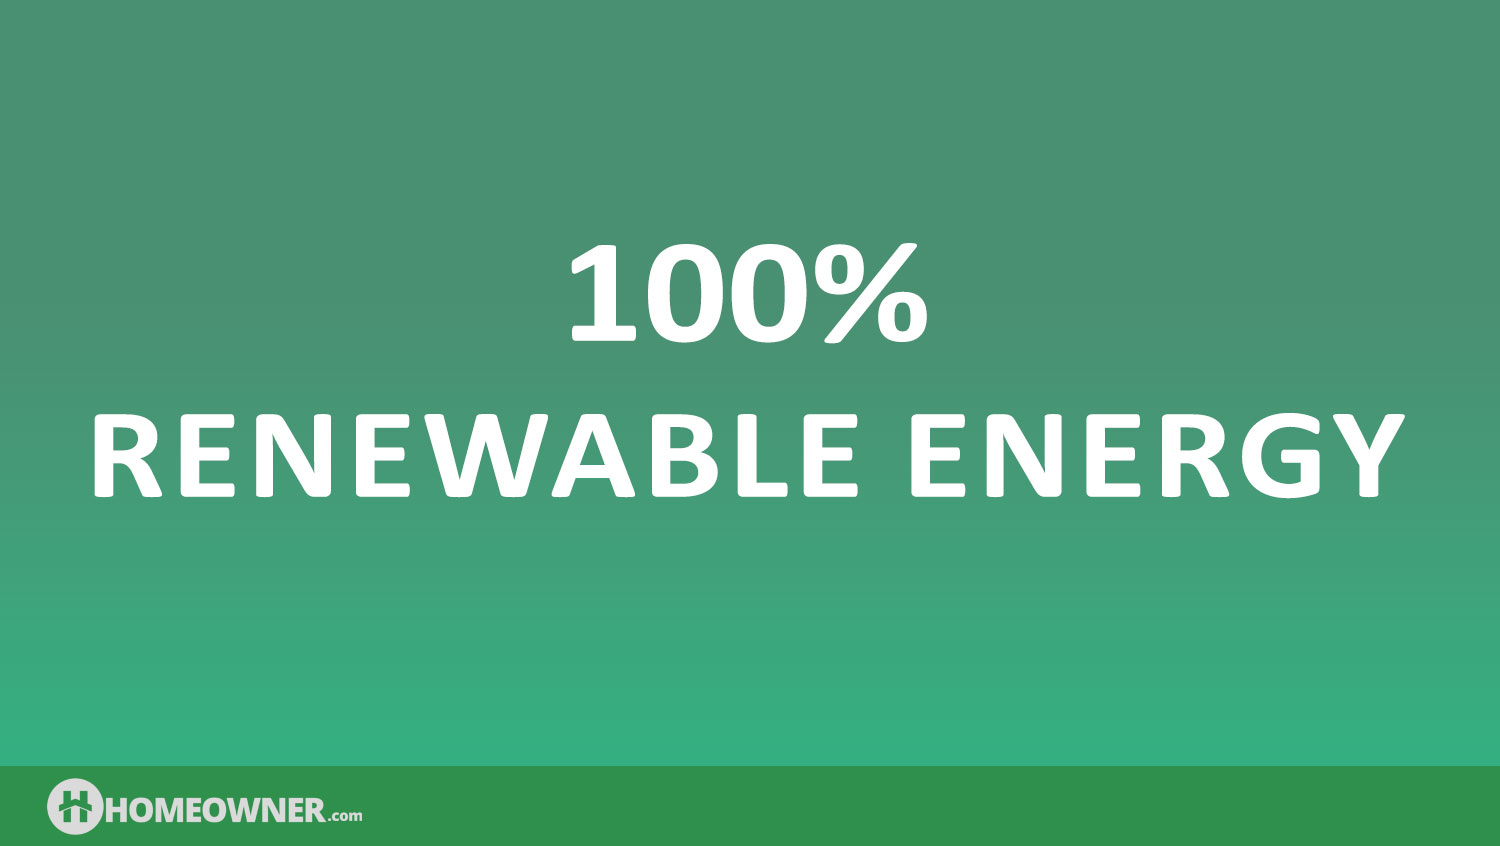 Can a Country Be 100% Reliant on Renewable Energy?